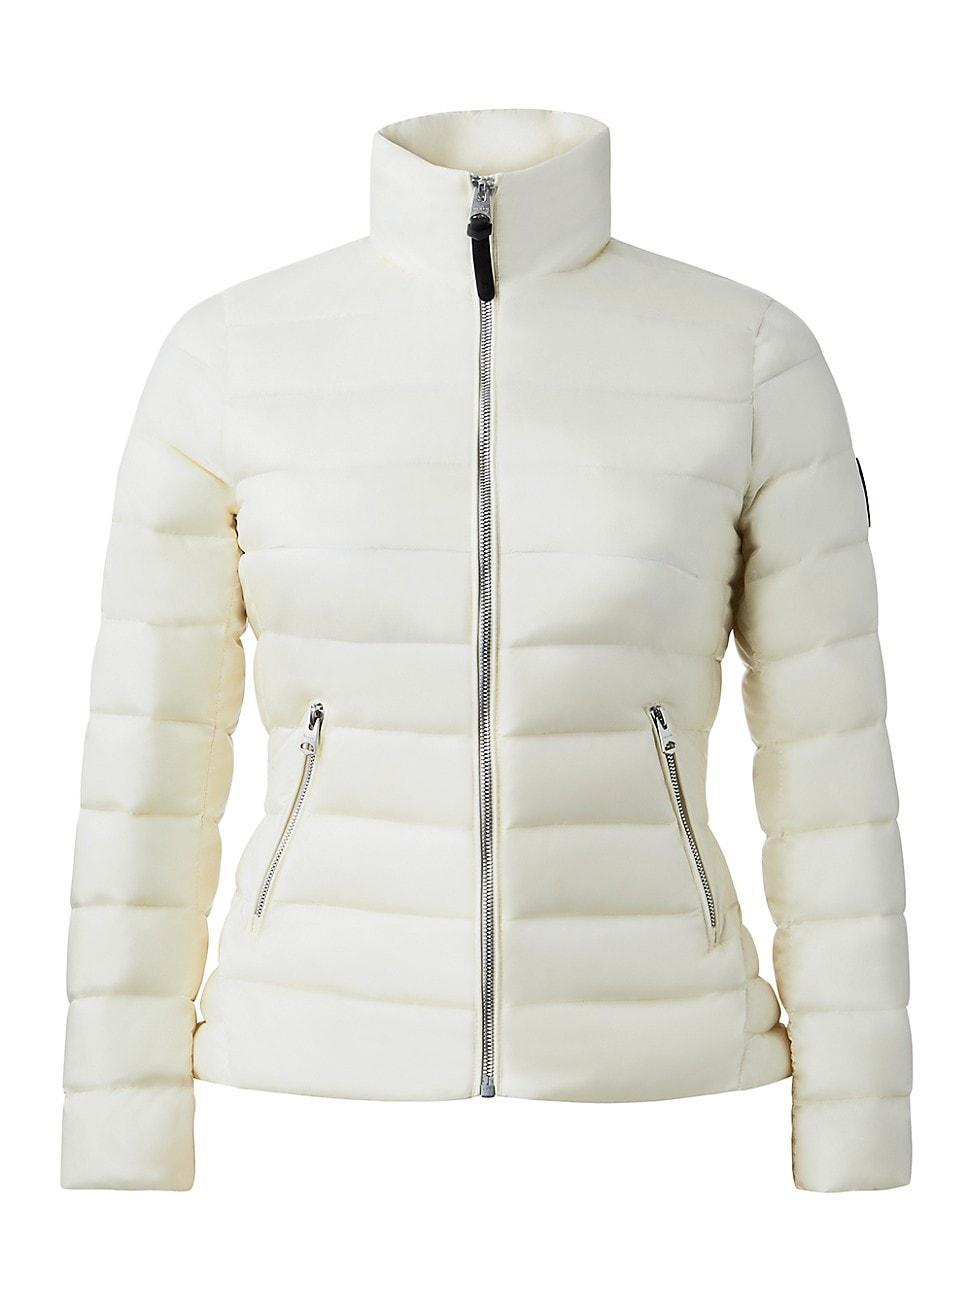 Mackage Davina Water Repellent 800 Fill Power Down Puffer Jacket Product Image